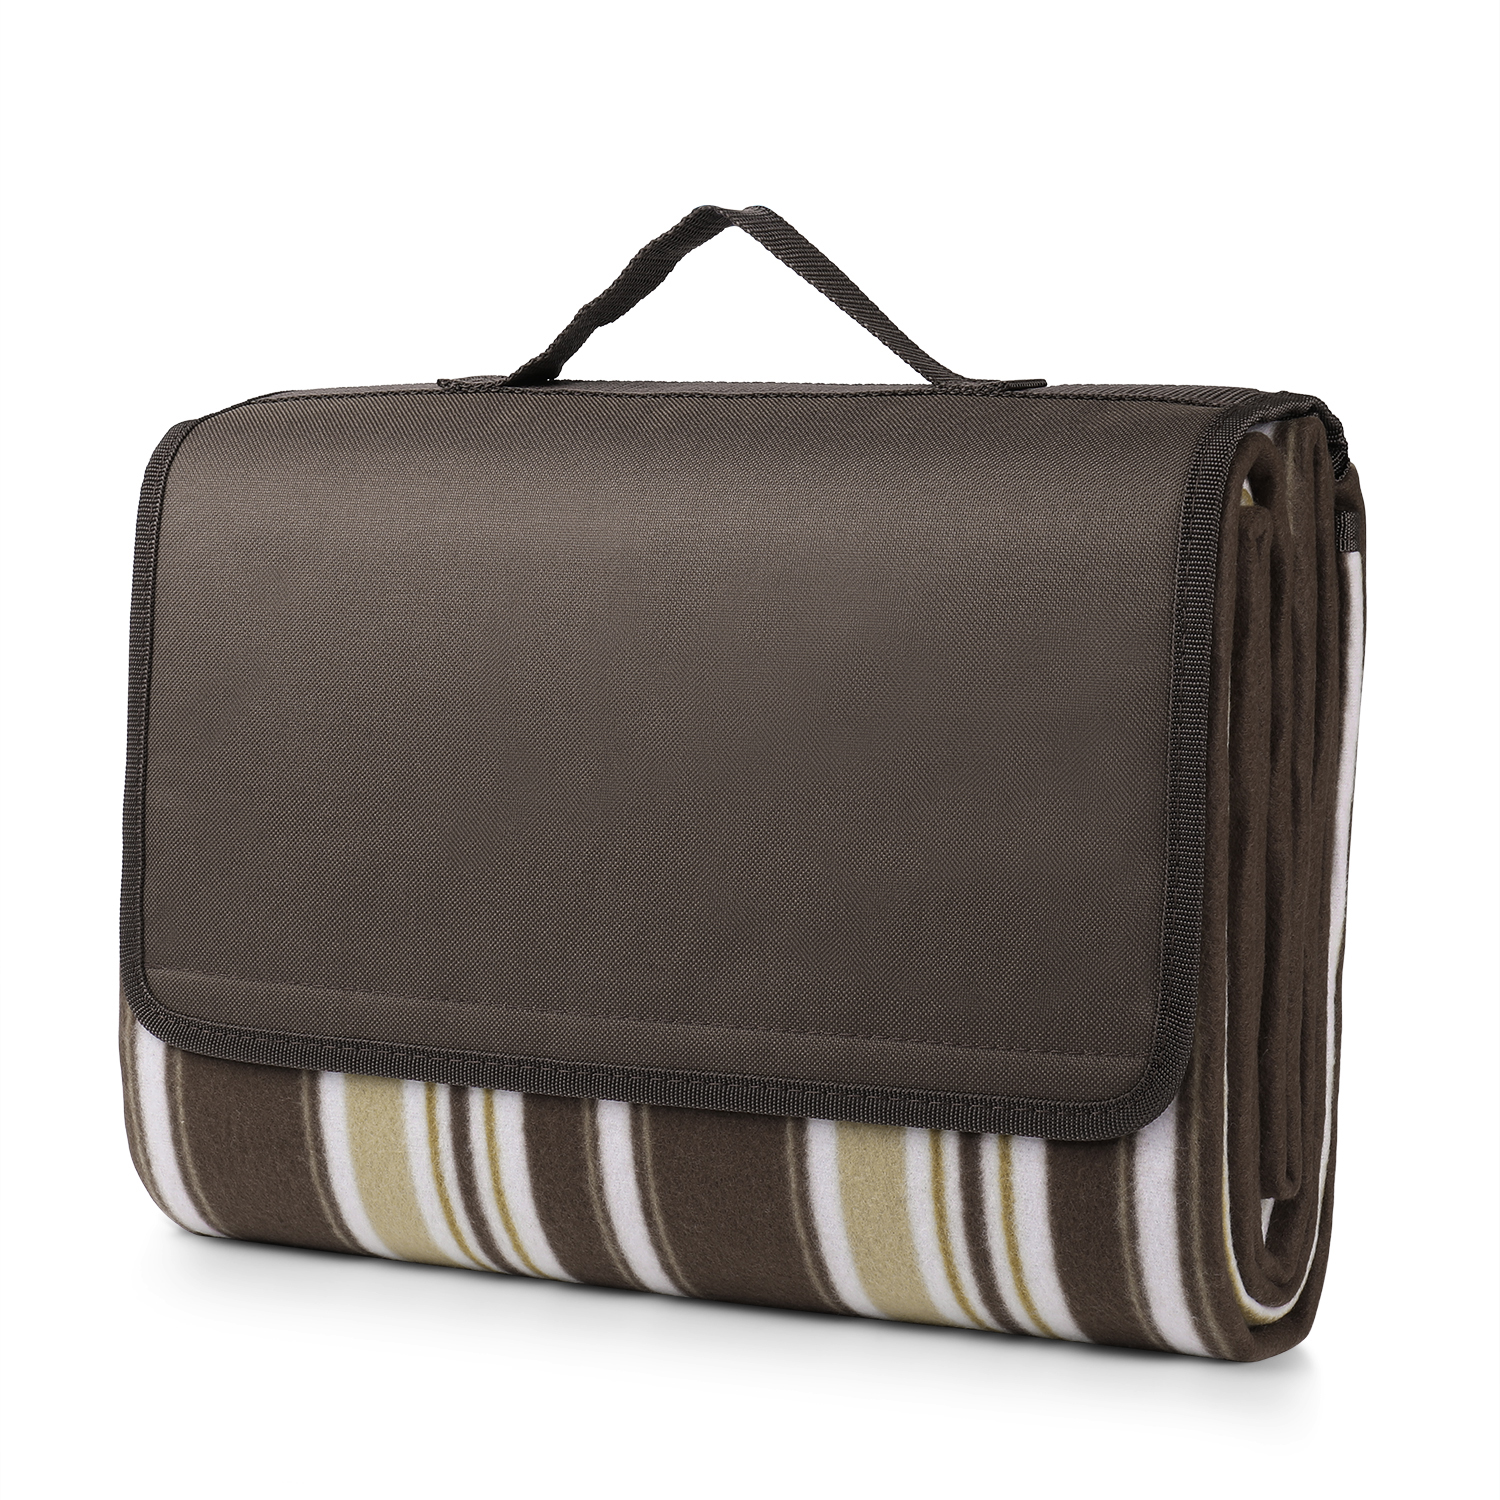 picnic travel rug with waterproof backing